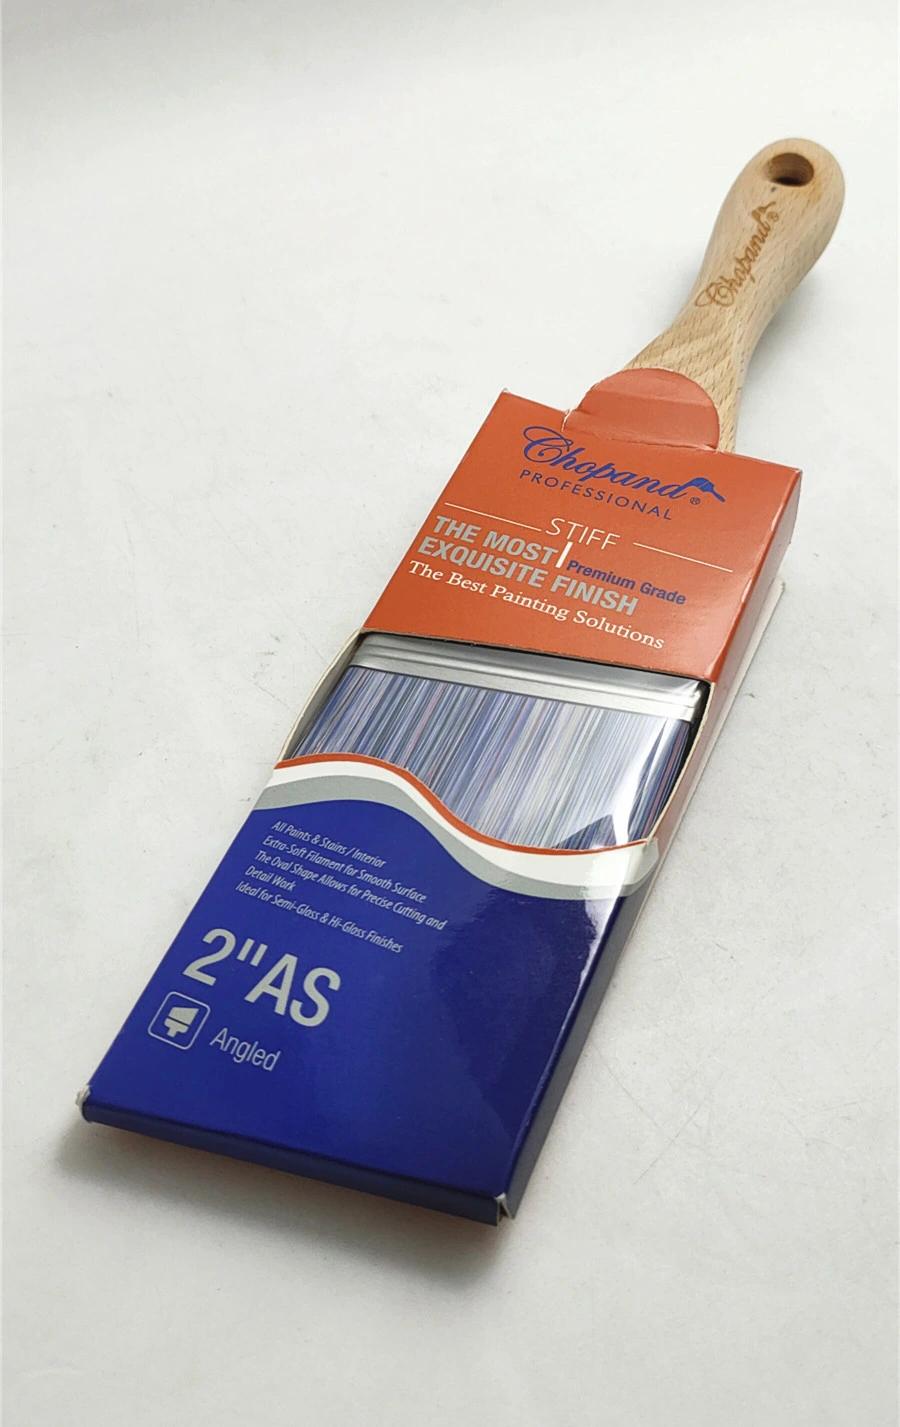 Customized High Quality Wooden Handle Paint Brush with Beautiful Appearance